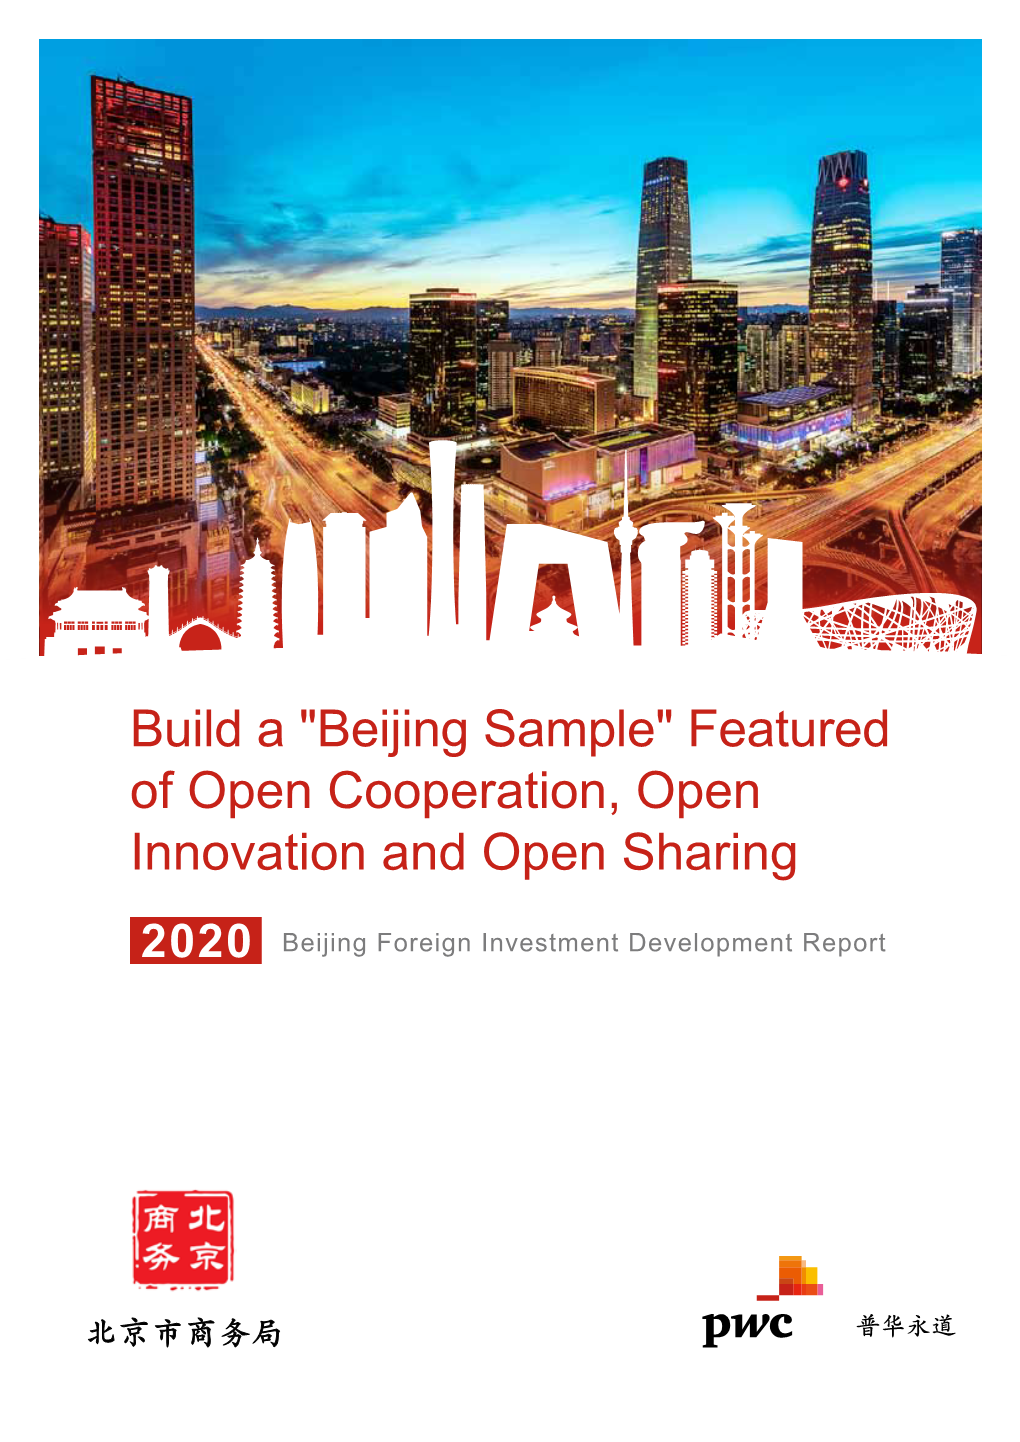 Beijing Sample" Featured of Open Cooperation, Open Innovation and Open Sharing